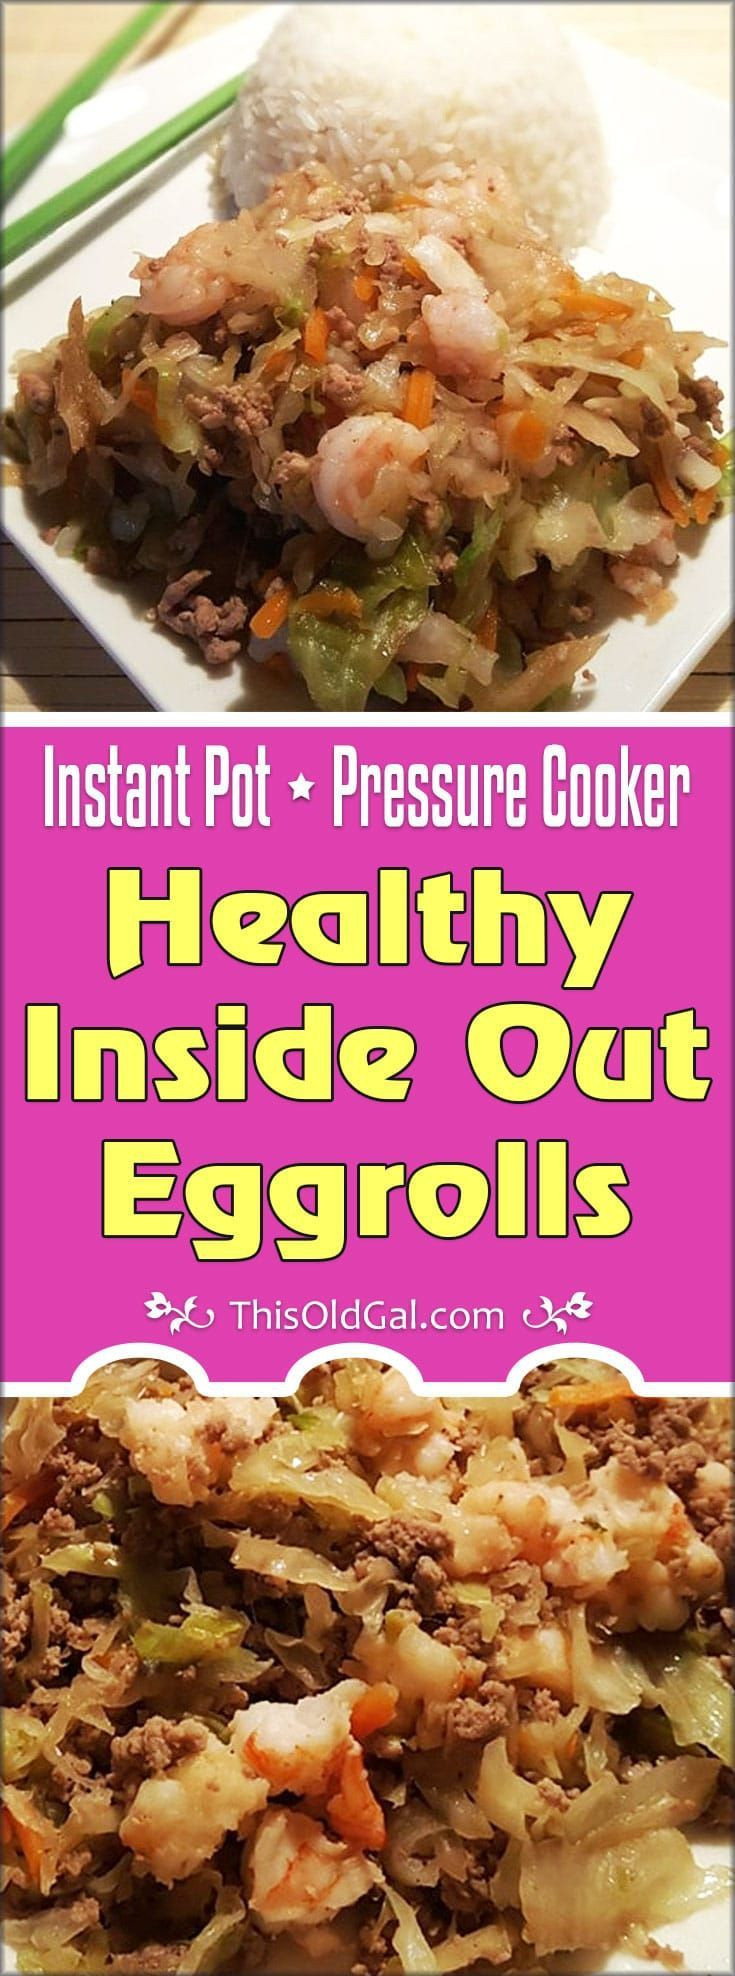 Low Calorie Pressure Cooker Recipes
 Pressure Cooker Healthy Inside Out Eggrolls are so healthy